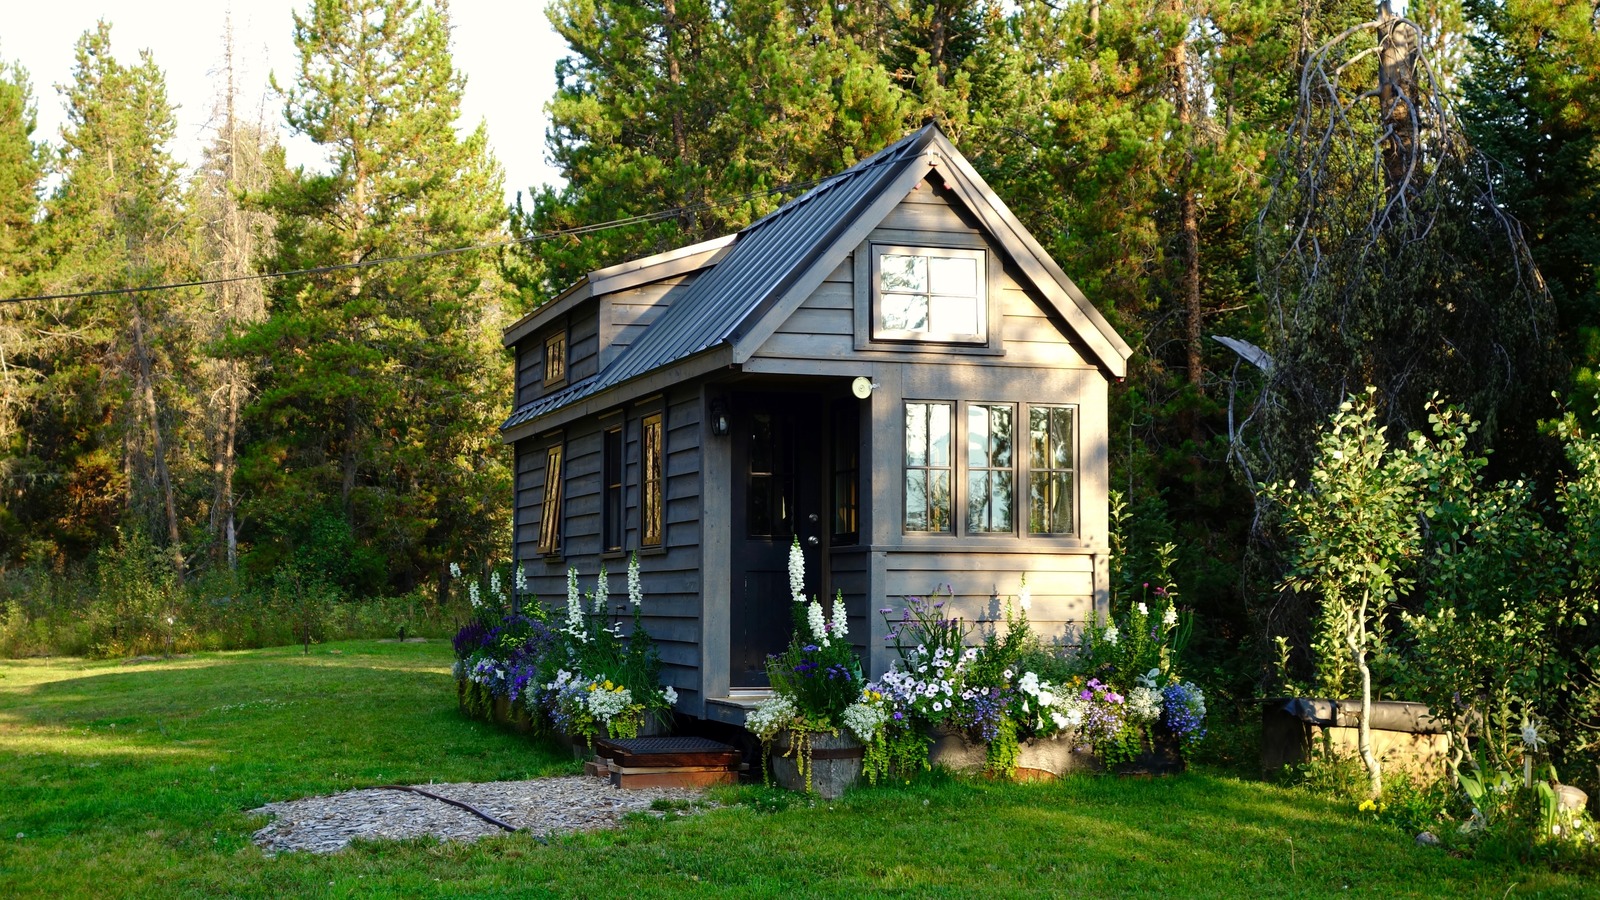 https://www.housedigest.com/img/gallery/the-3-best-states-to-live-in-if-you-have-a-tiny-house/l-intro-1659192742.jpg